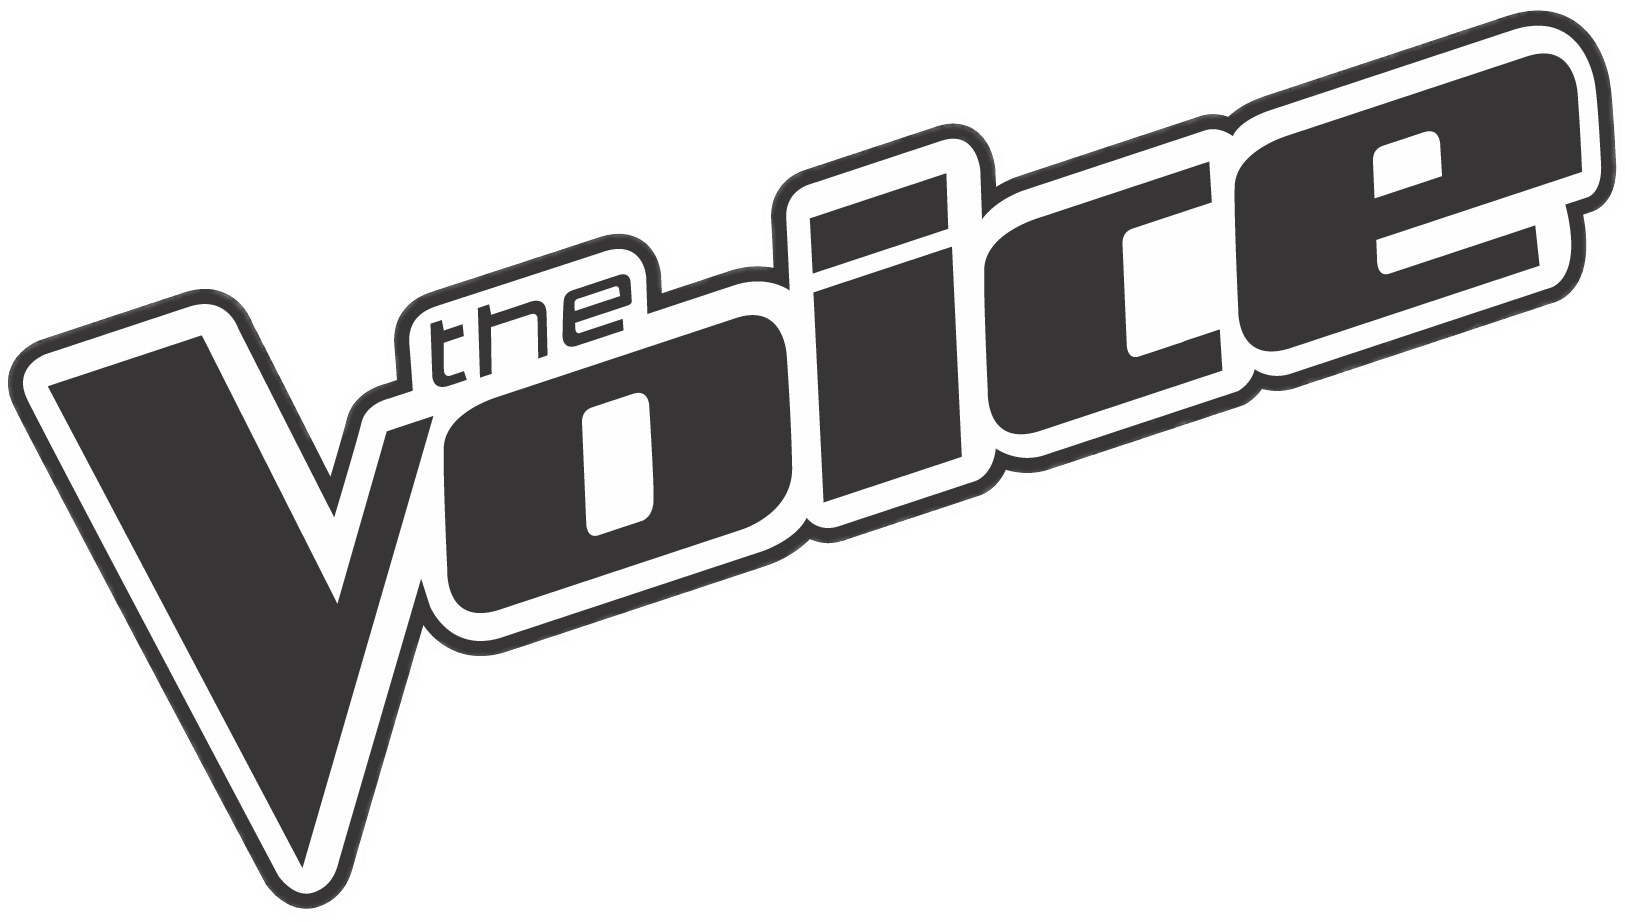 Google Voice Logo - Rotating Chairs On The Voice